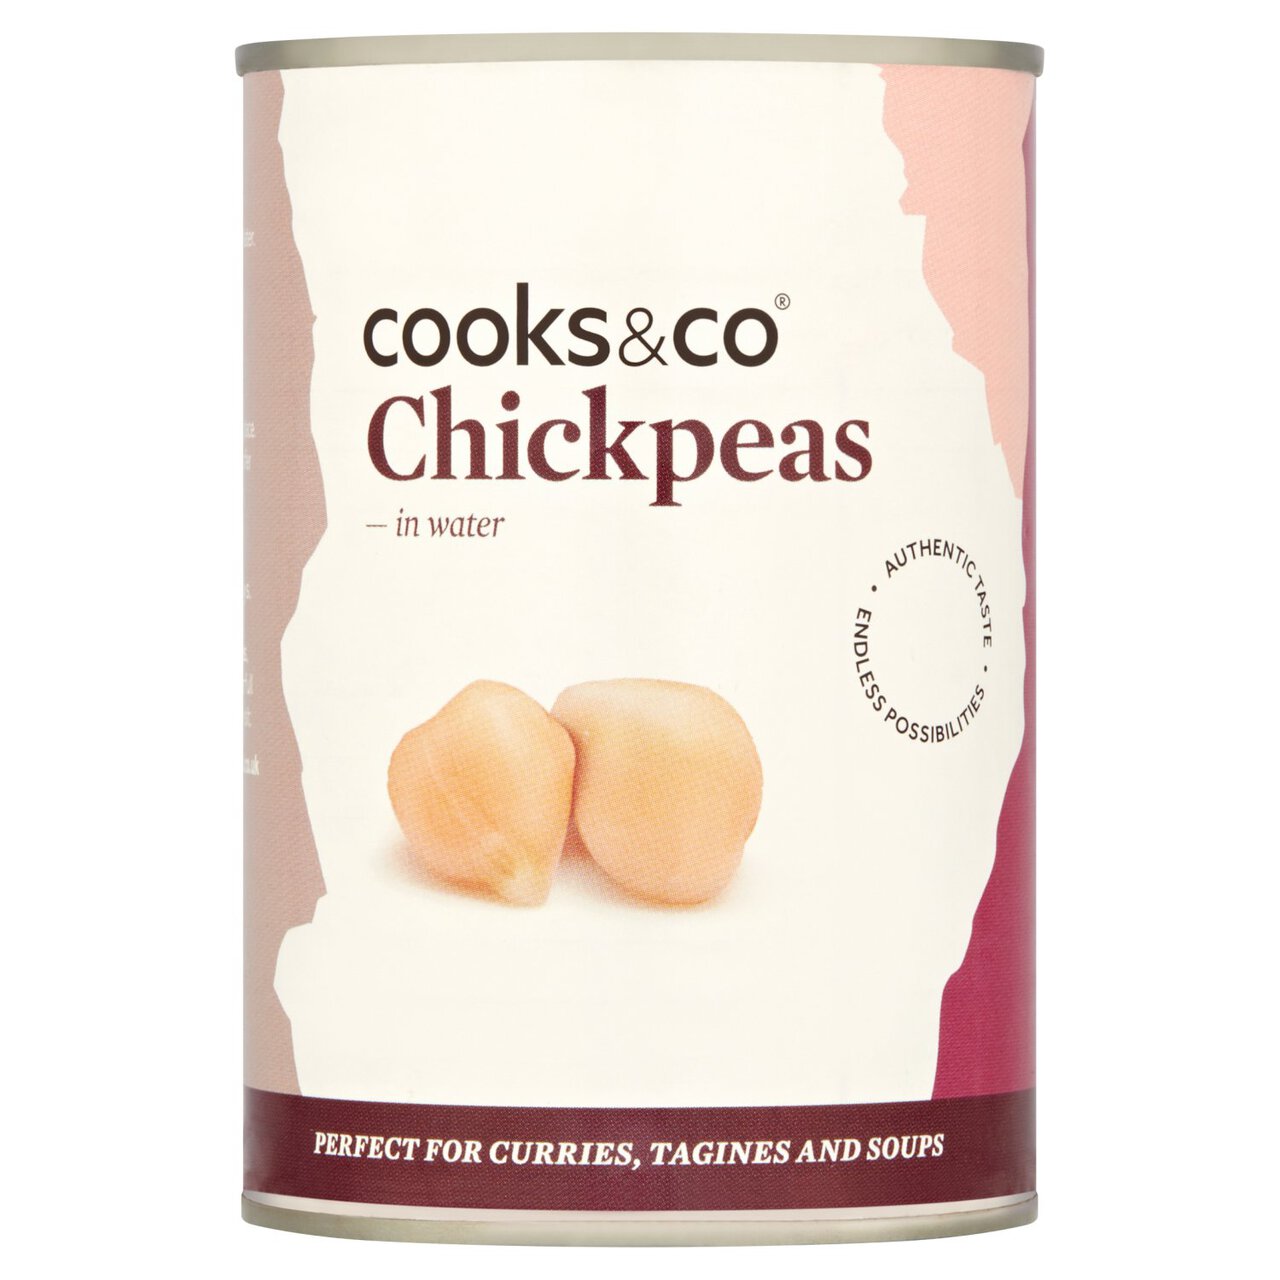 Cooks & Co Chickpeas 400g